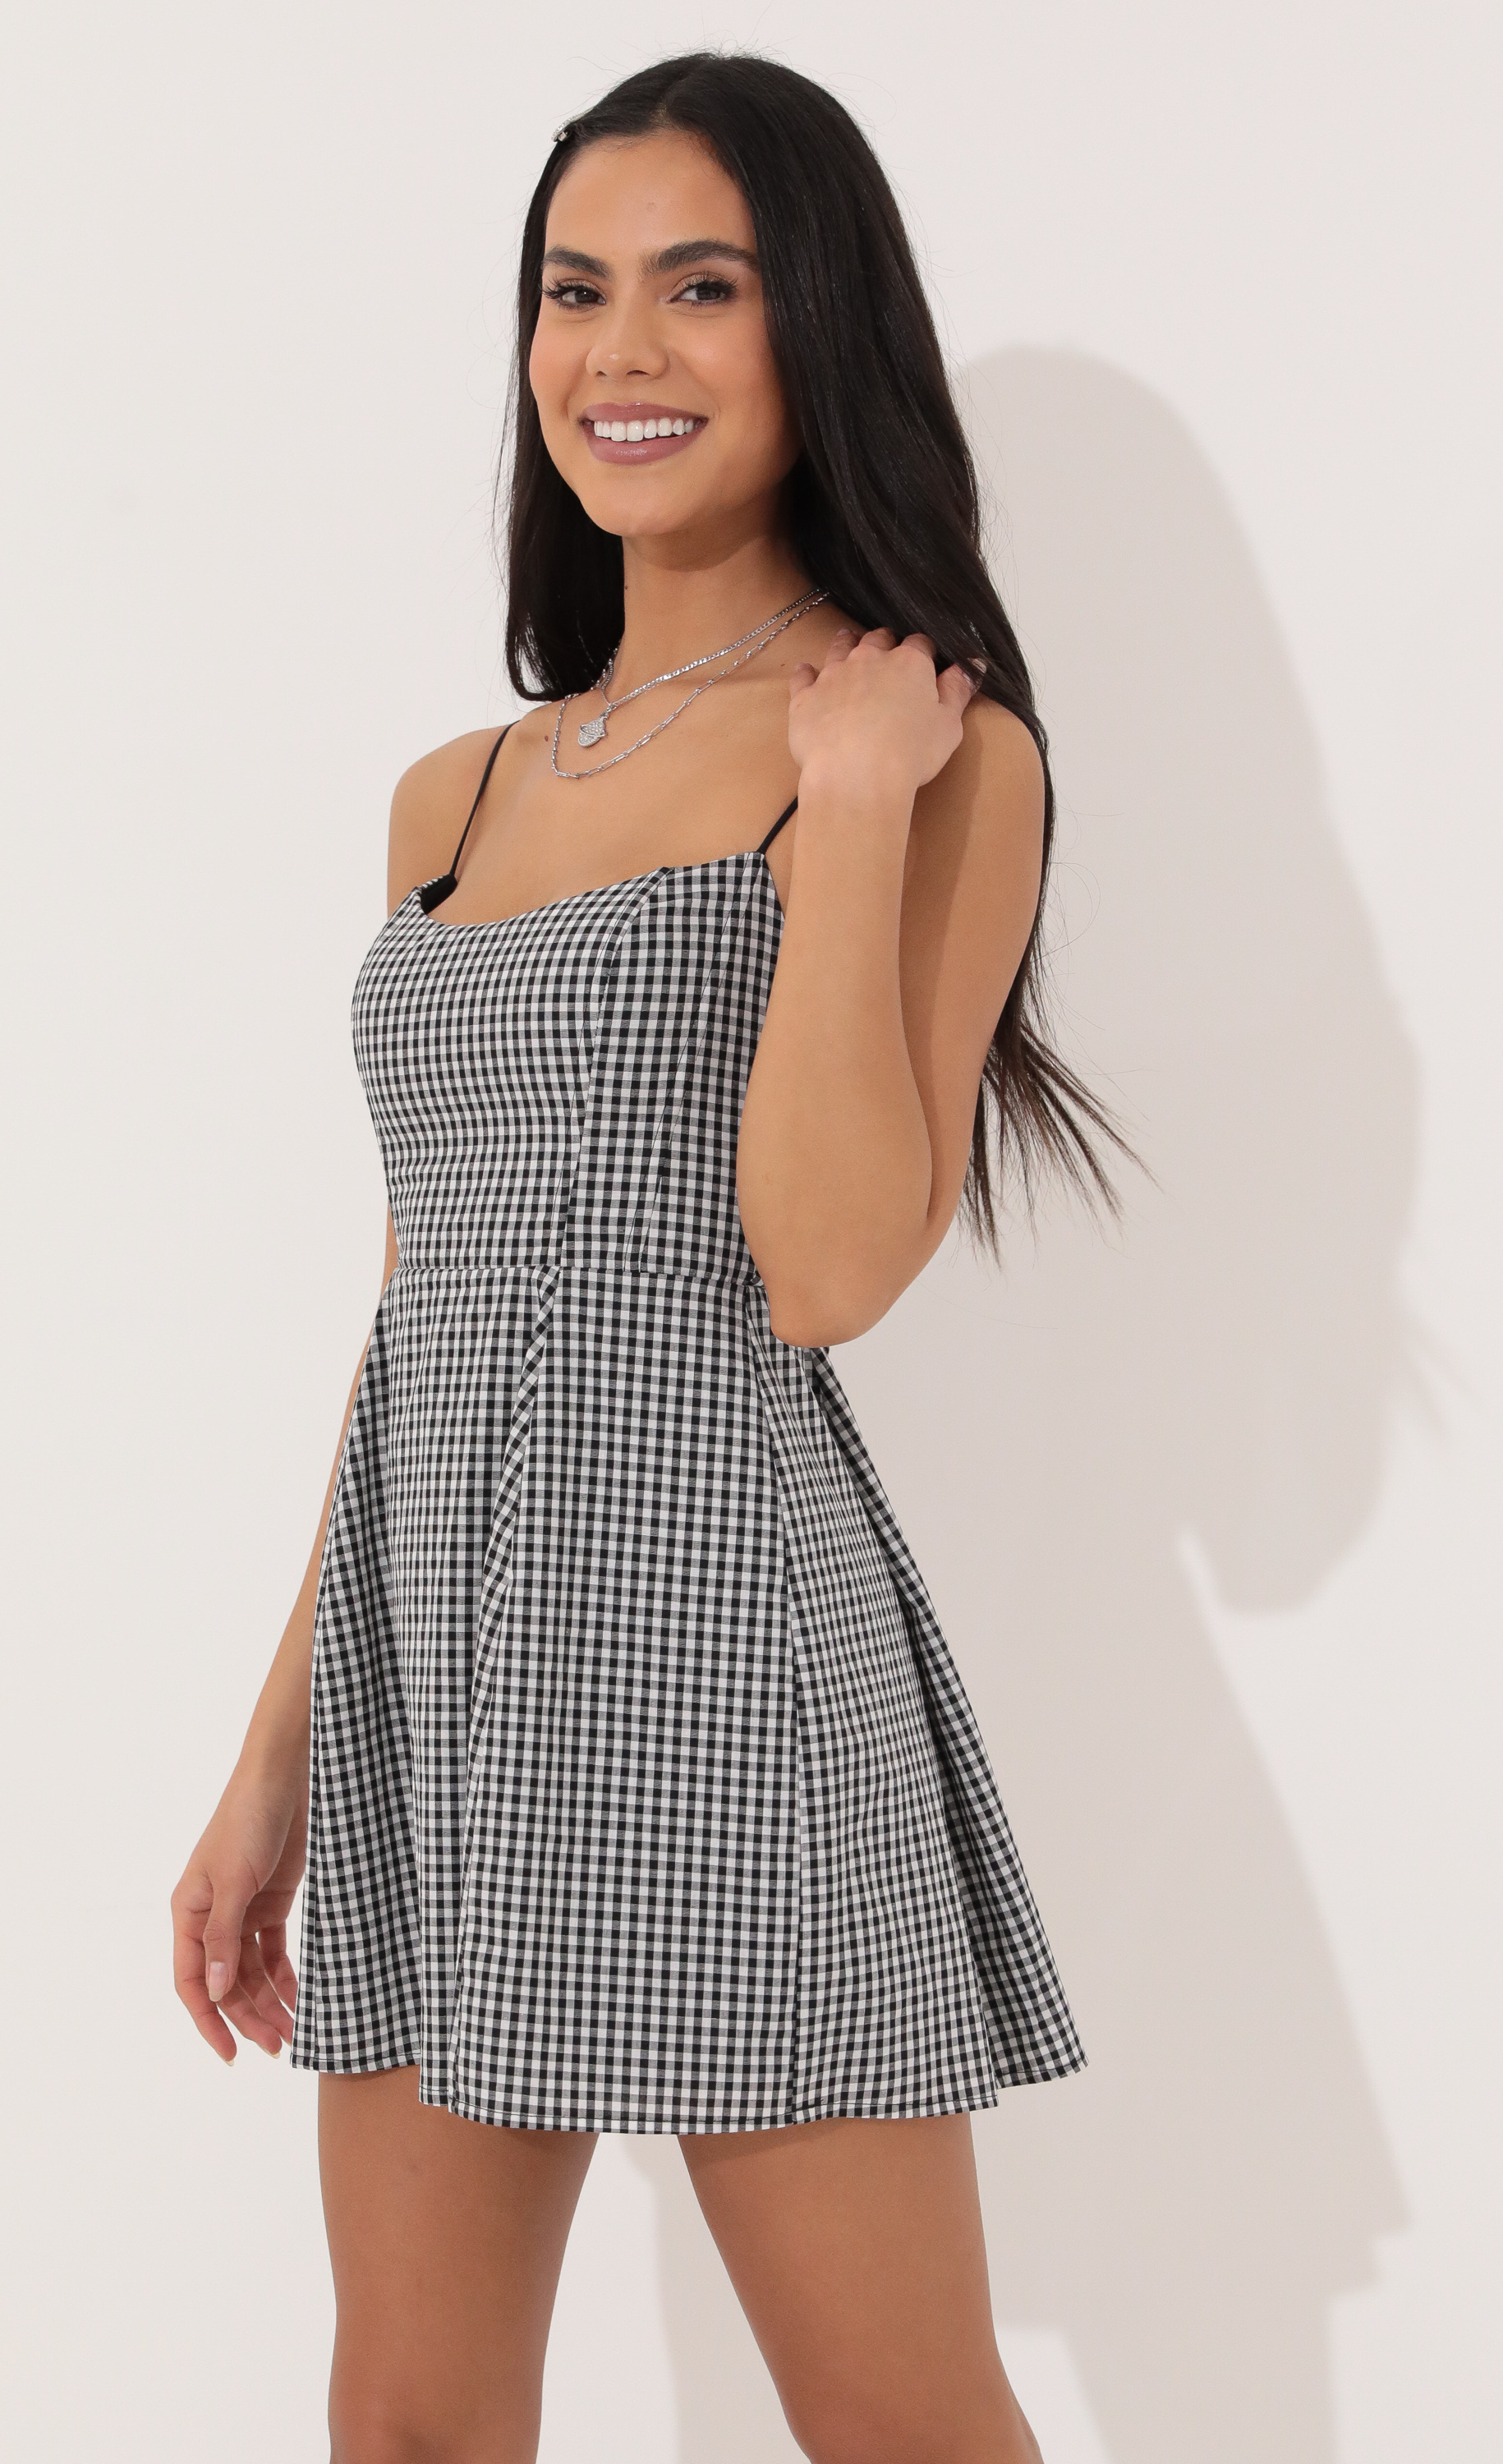 A-line dress in Black and White Checkered